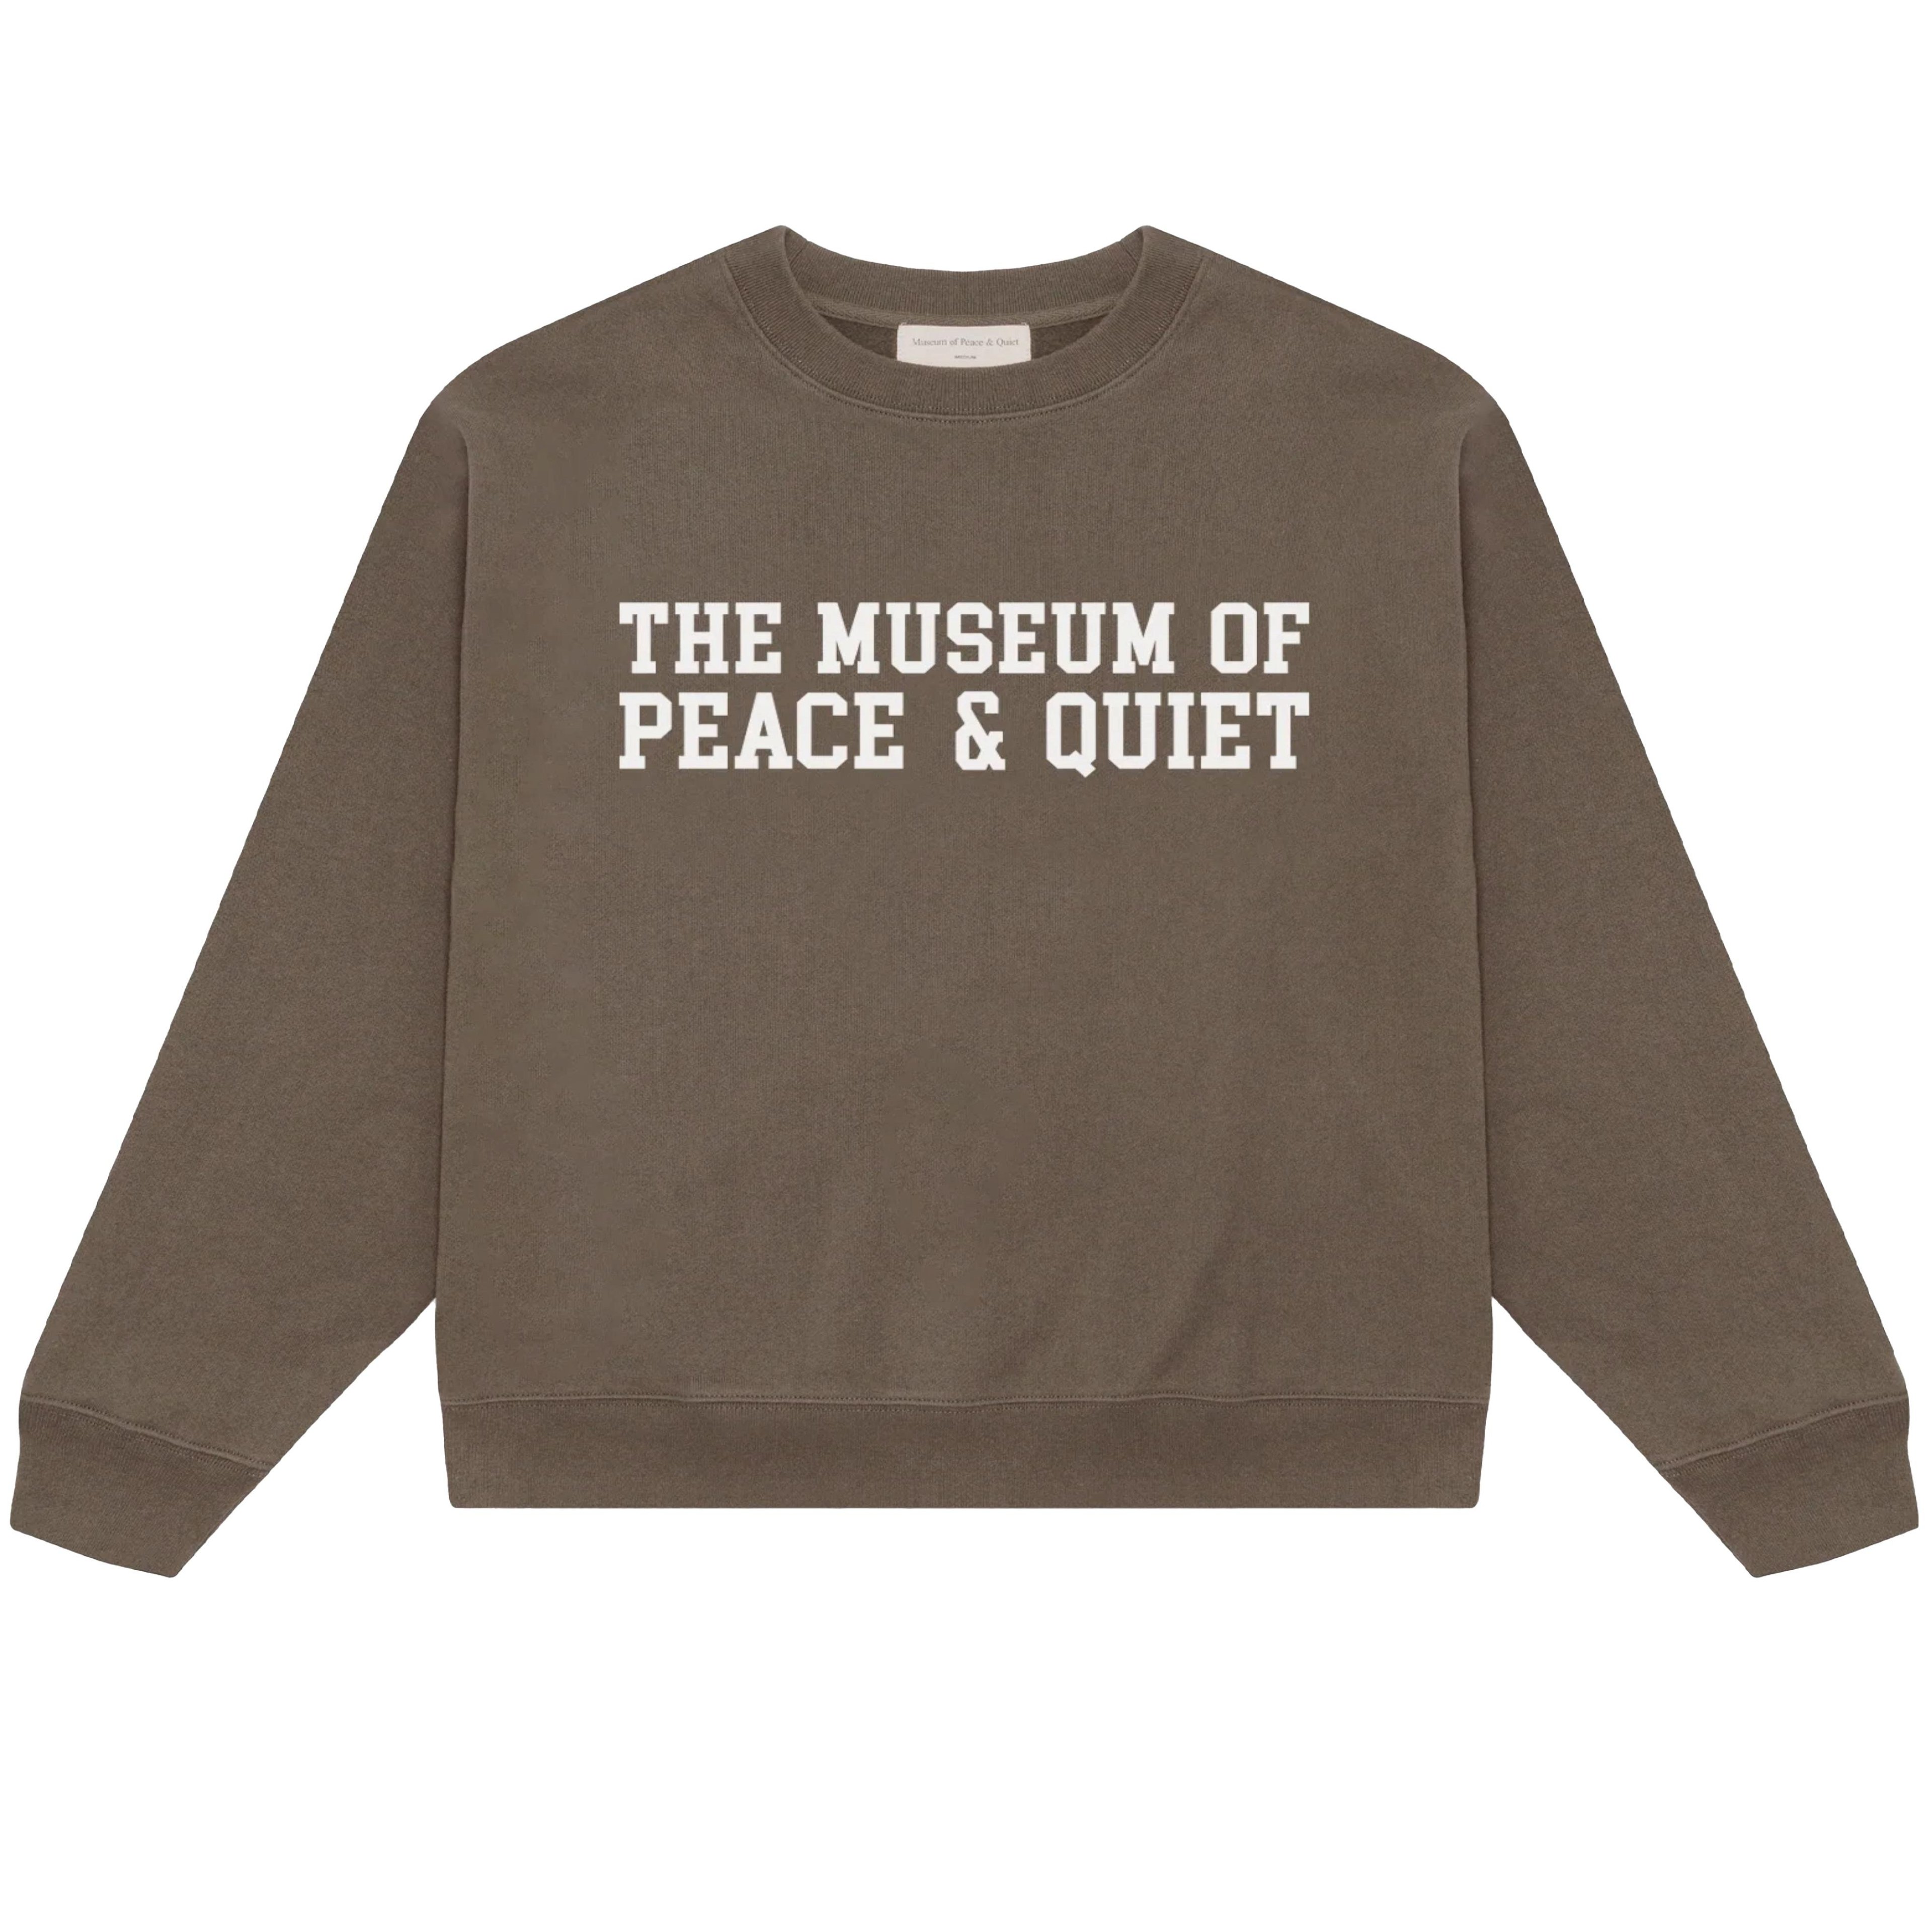 MUSEUM OF PEACE AND QUIET - Men's Campus Crewneck - (Clay) by MUSEUM OF PEACE&QUIET